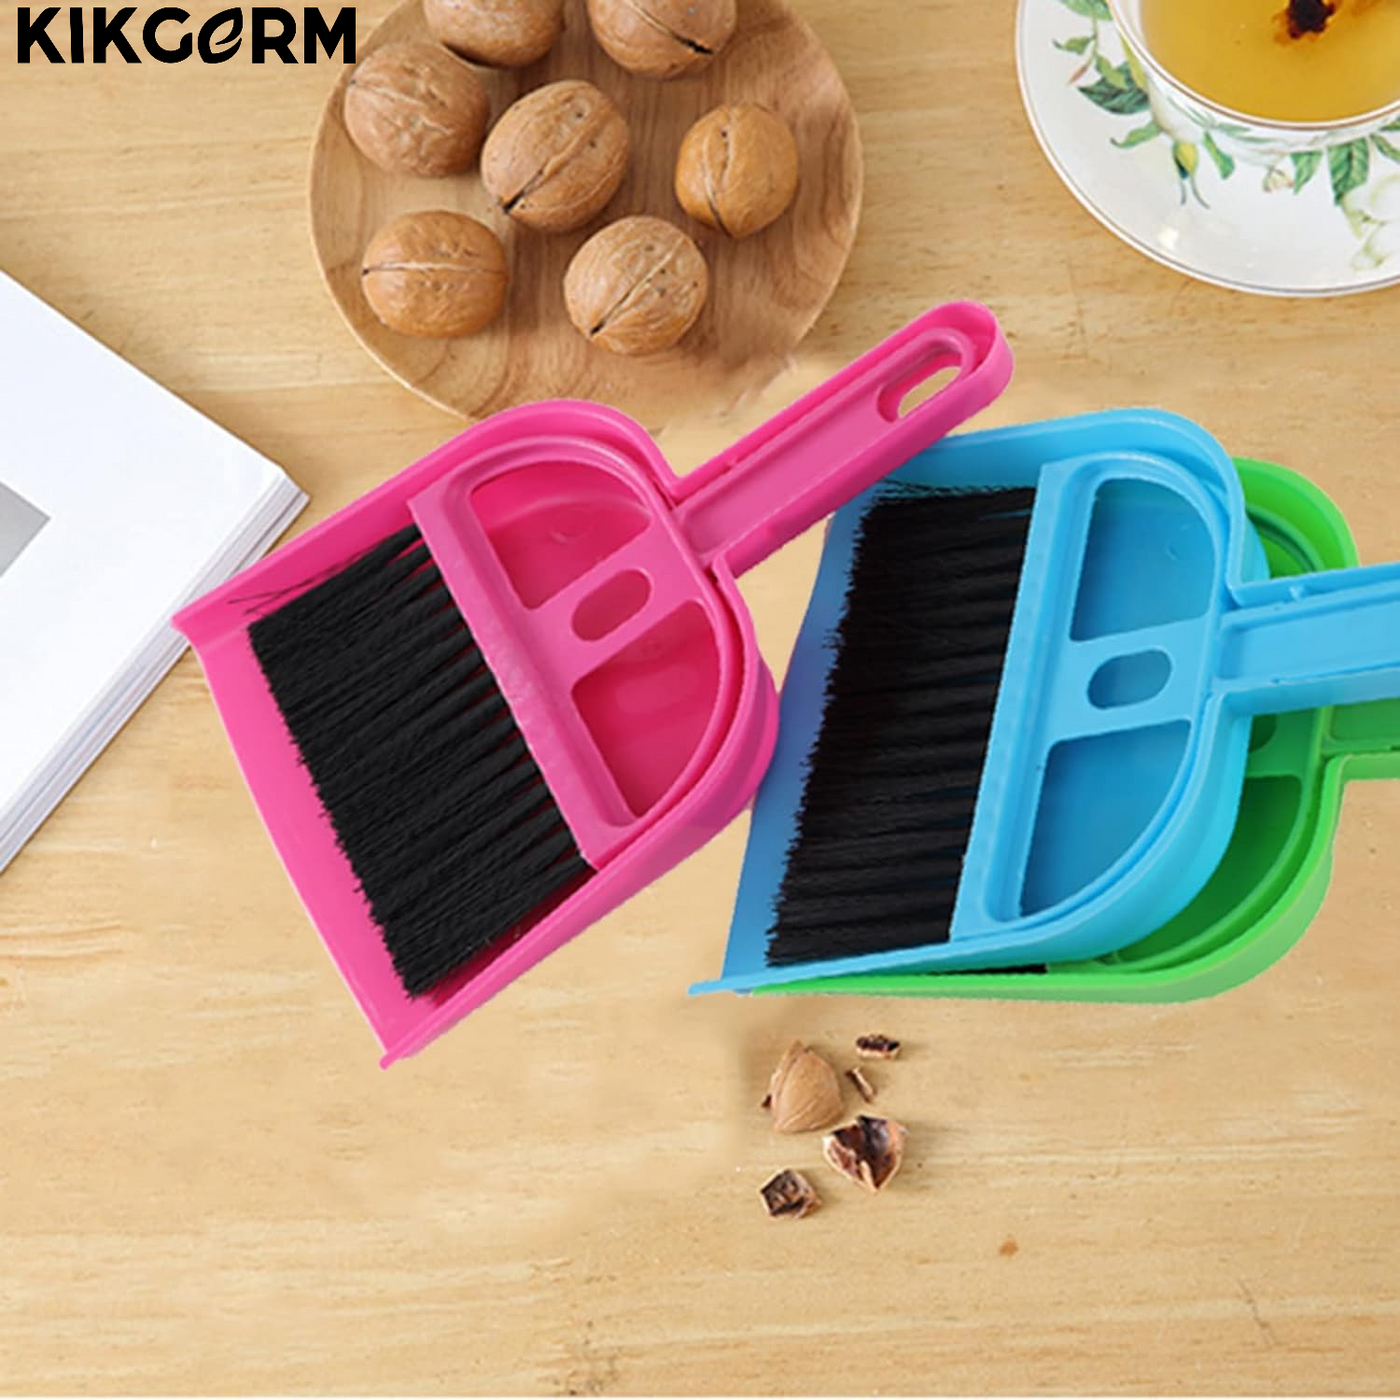 Mini Cleaning Brush and Dustpan Set | Dish, Kitchen, Desktop Cleaning Tools | 1 Pcs | Color May Vary